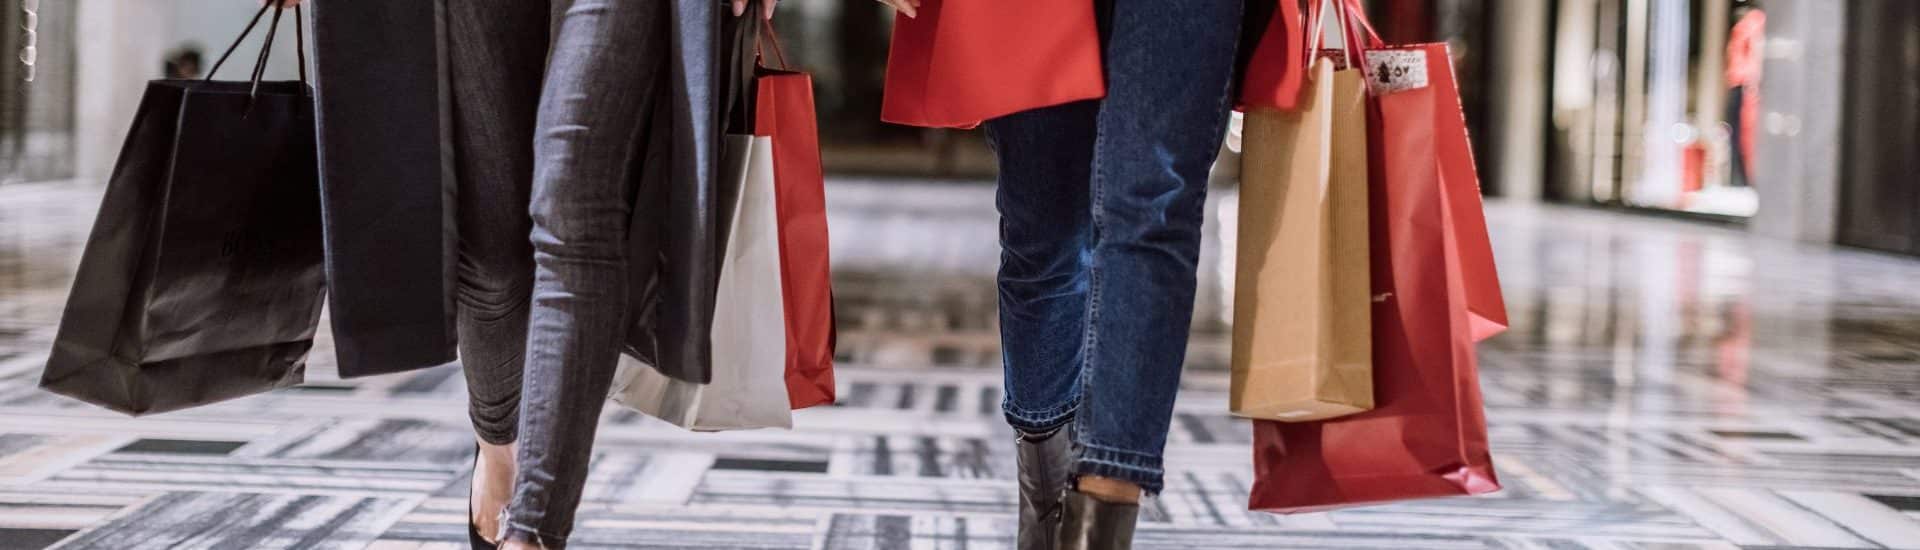 View of two people waist down holding shopping bags and walking through a mall.